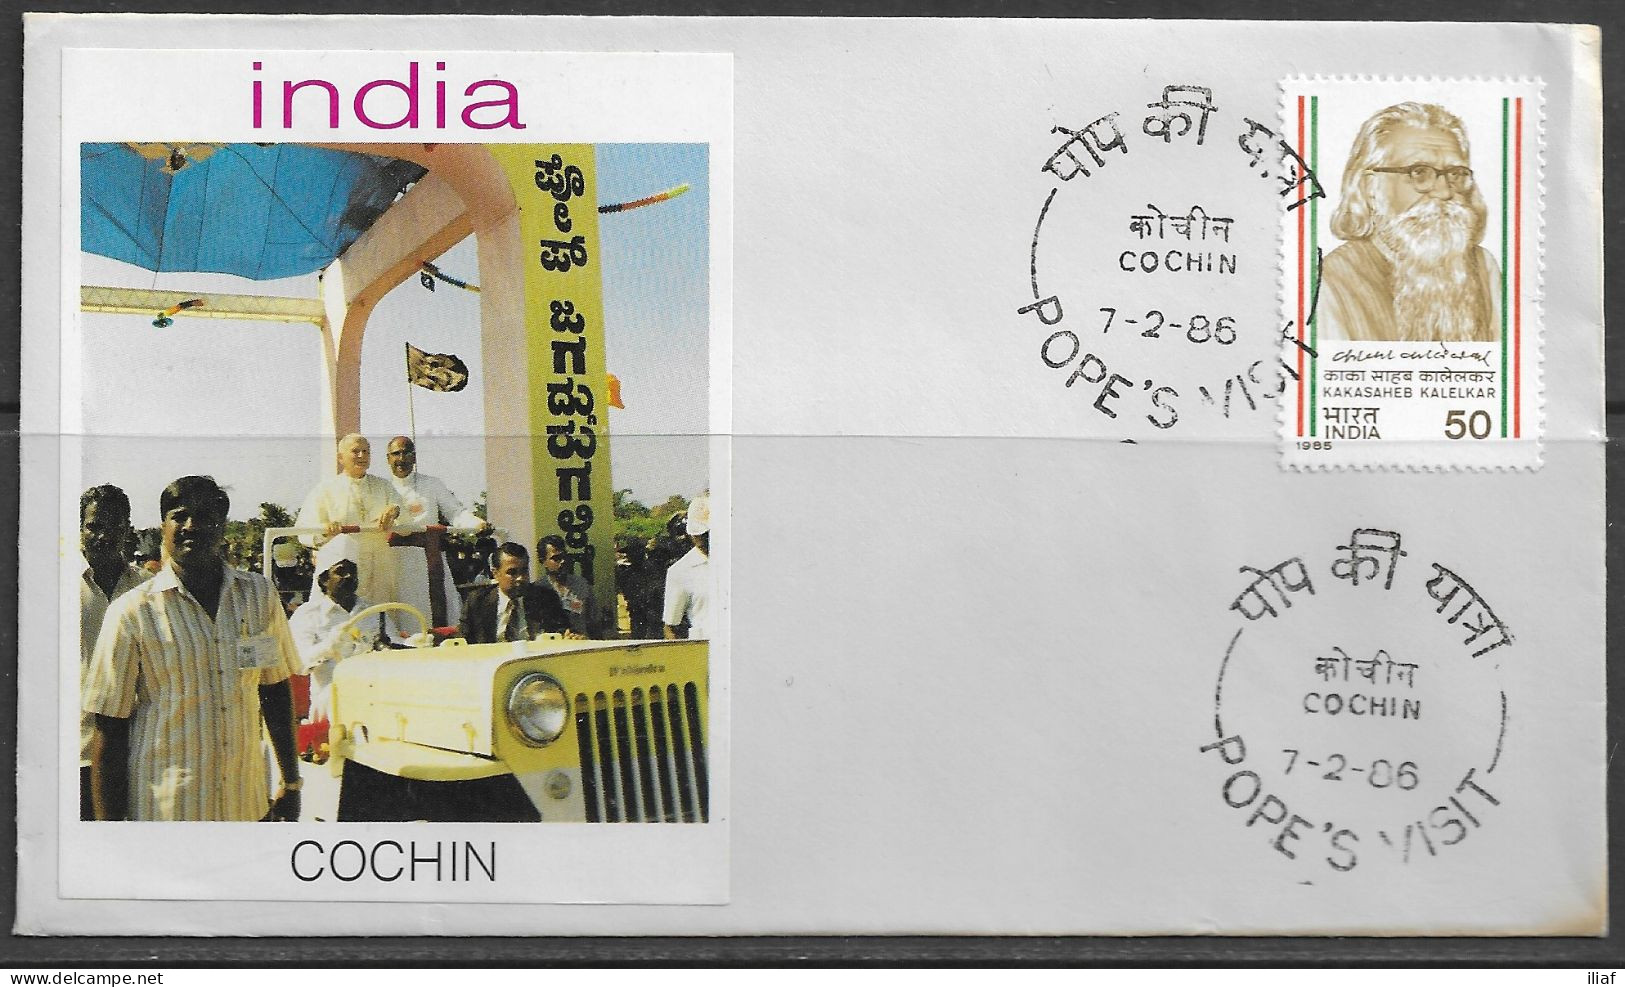 India.   Pastoral Visit Of Pope John Paul II To India, Cochin.  Special Cancellation On Cachet Special Envelope - Briefe U. Dokumente